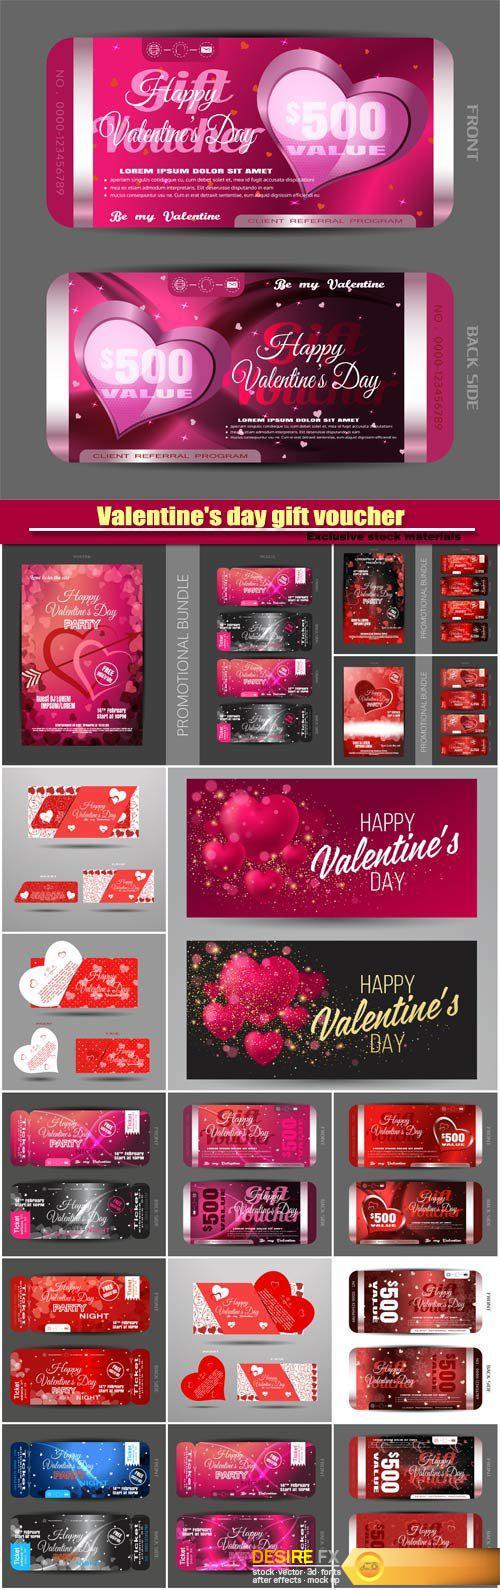 Vector set of greeting card and happy Valentine's day gift voucher